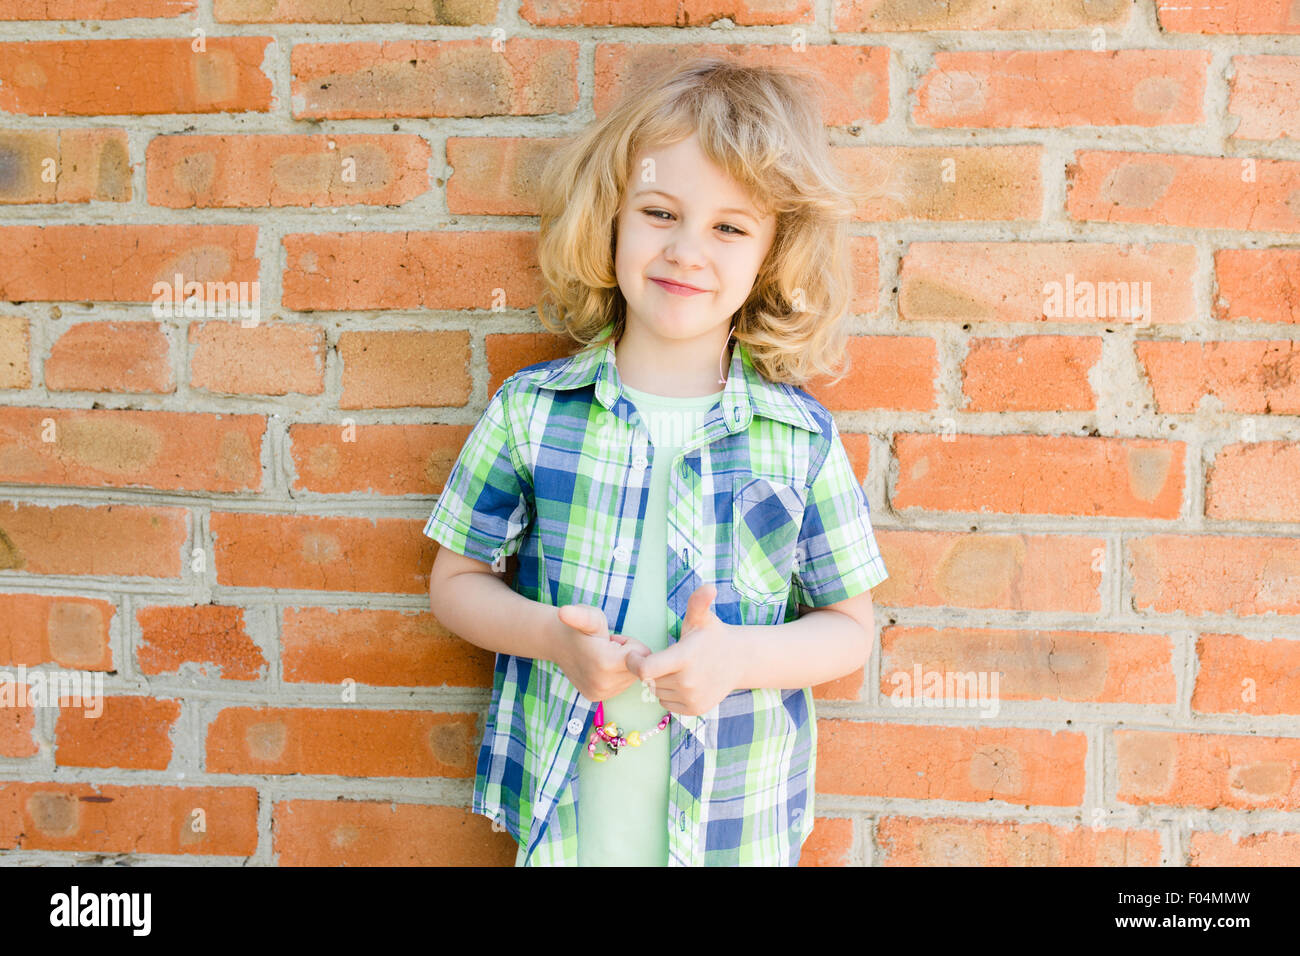 Portrait of emotional little girl in summer dress outdoor, brick wall behind Stock Photo